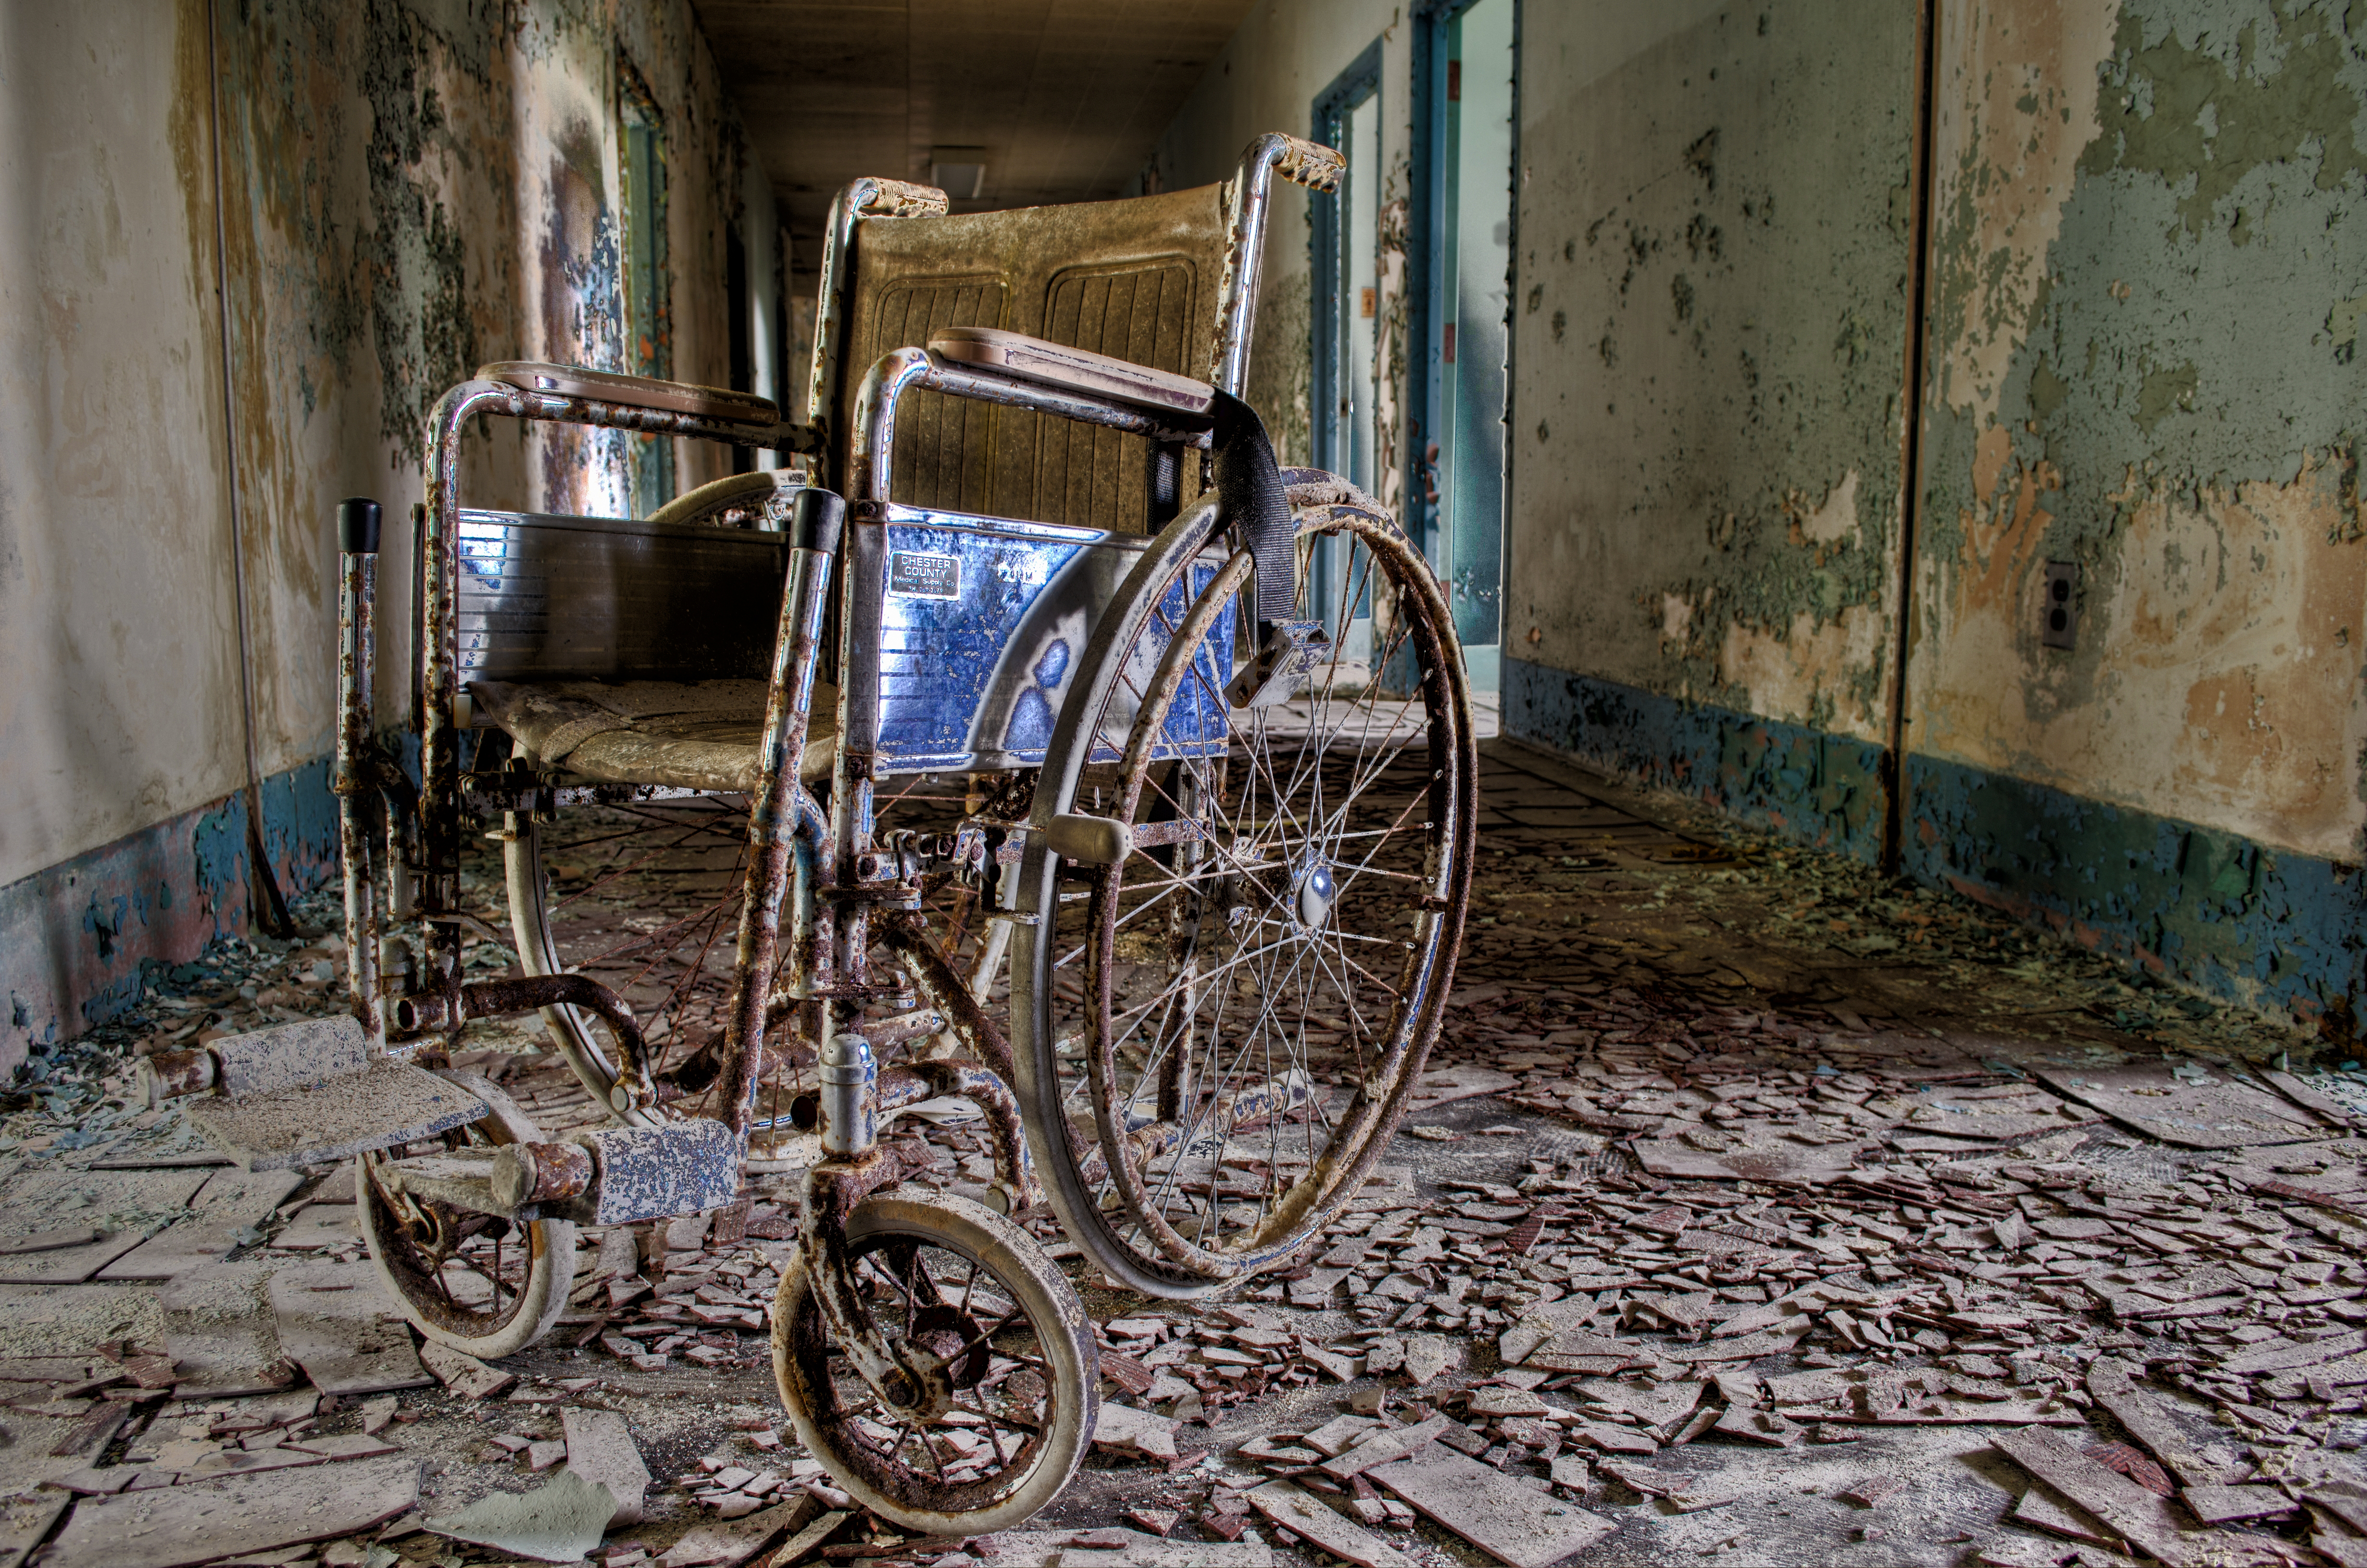 Abandoned decay | Second Nature Photography